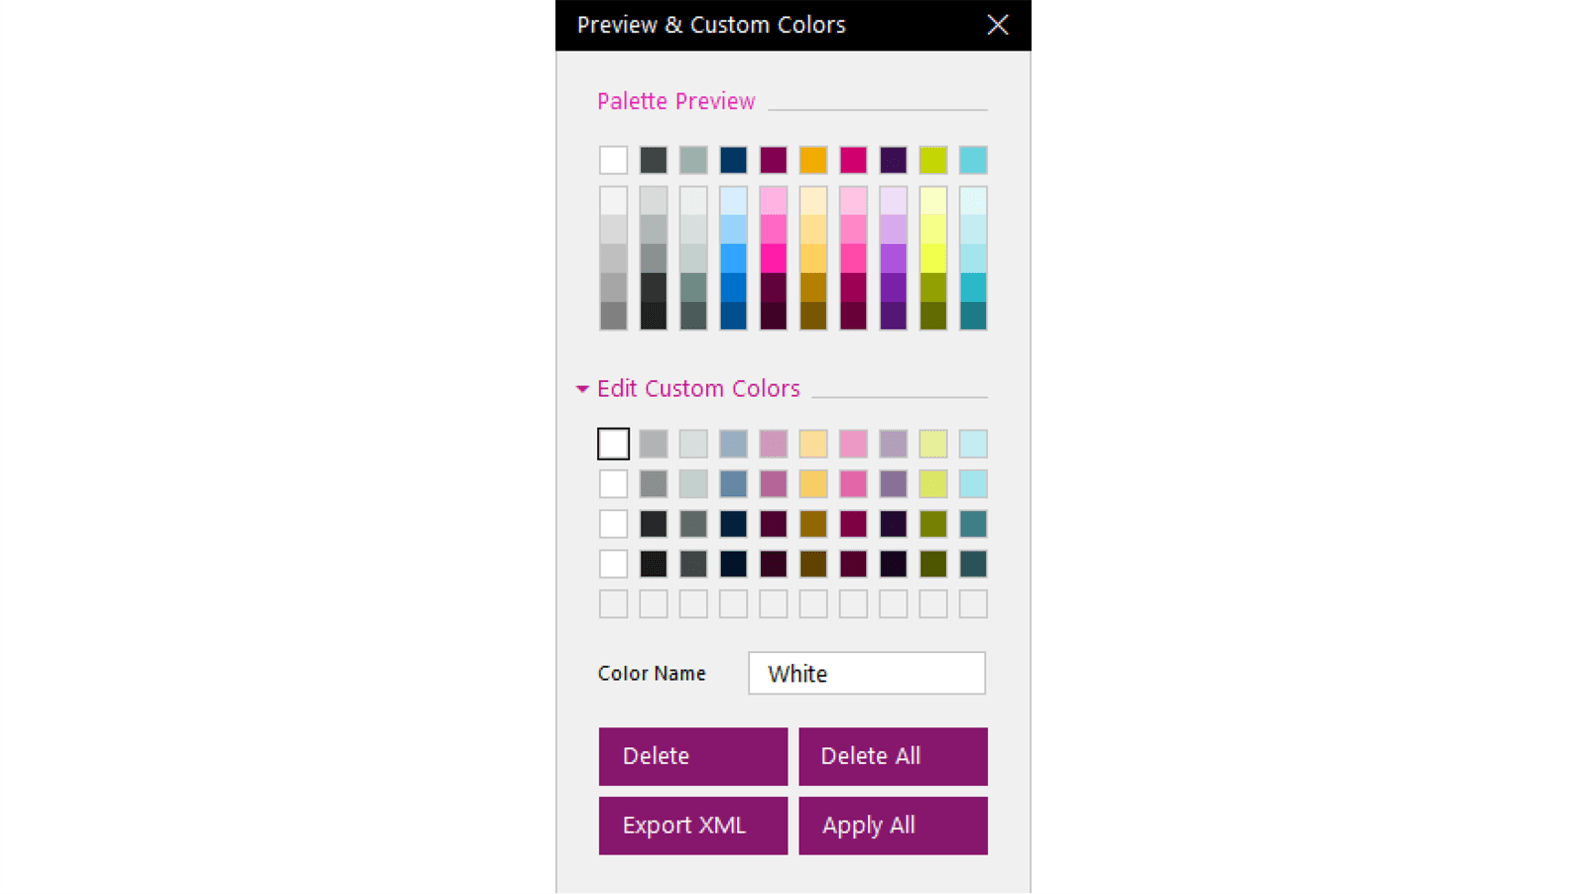 Screenshot of Preview & Custom Colors pop-up with completed custom colors panel.